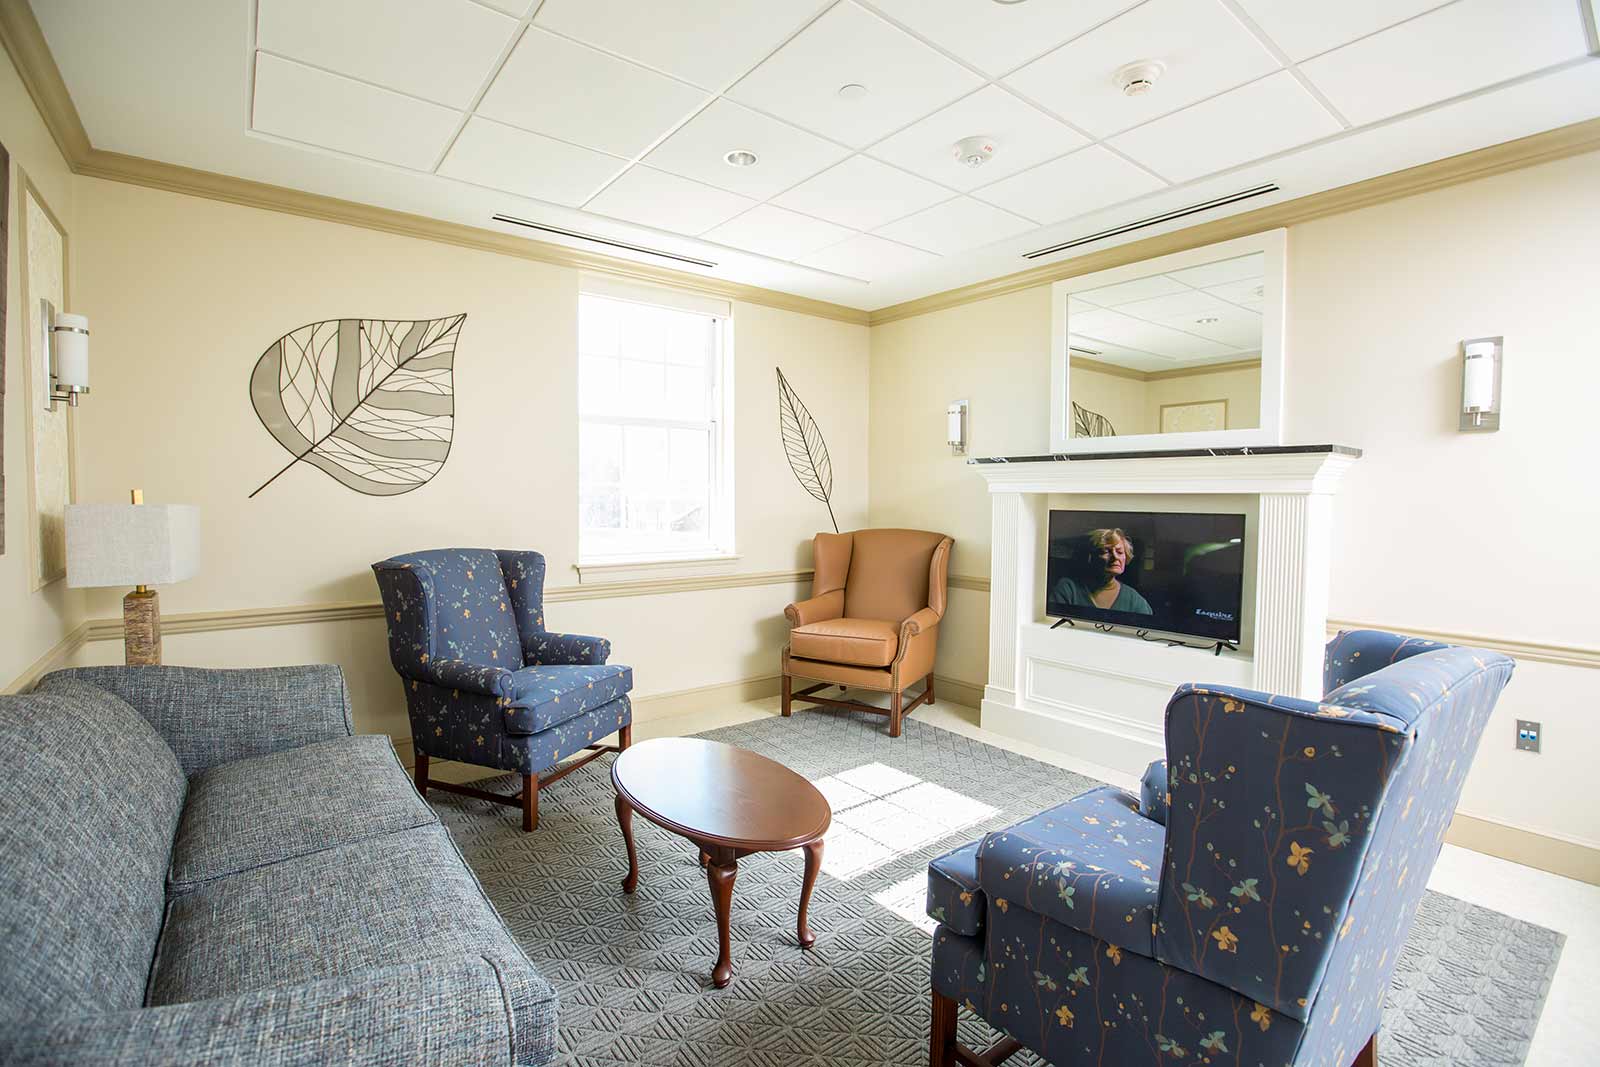 Common areas in residence halls give students the perfect spot for in-depth conversations—or to binge watch an epic season of your favorite show on Netflix. 